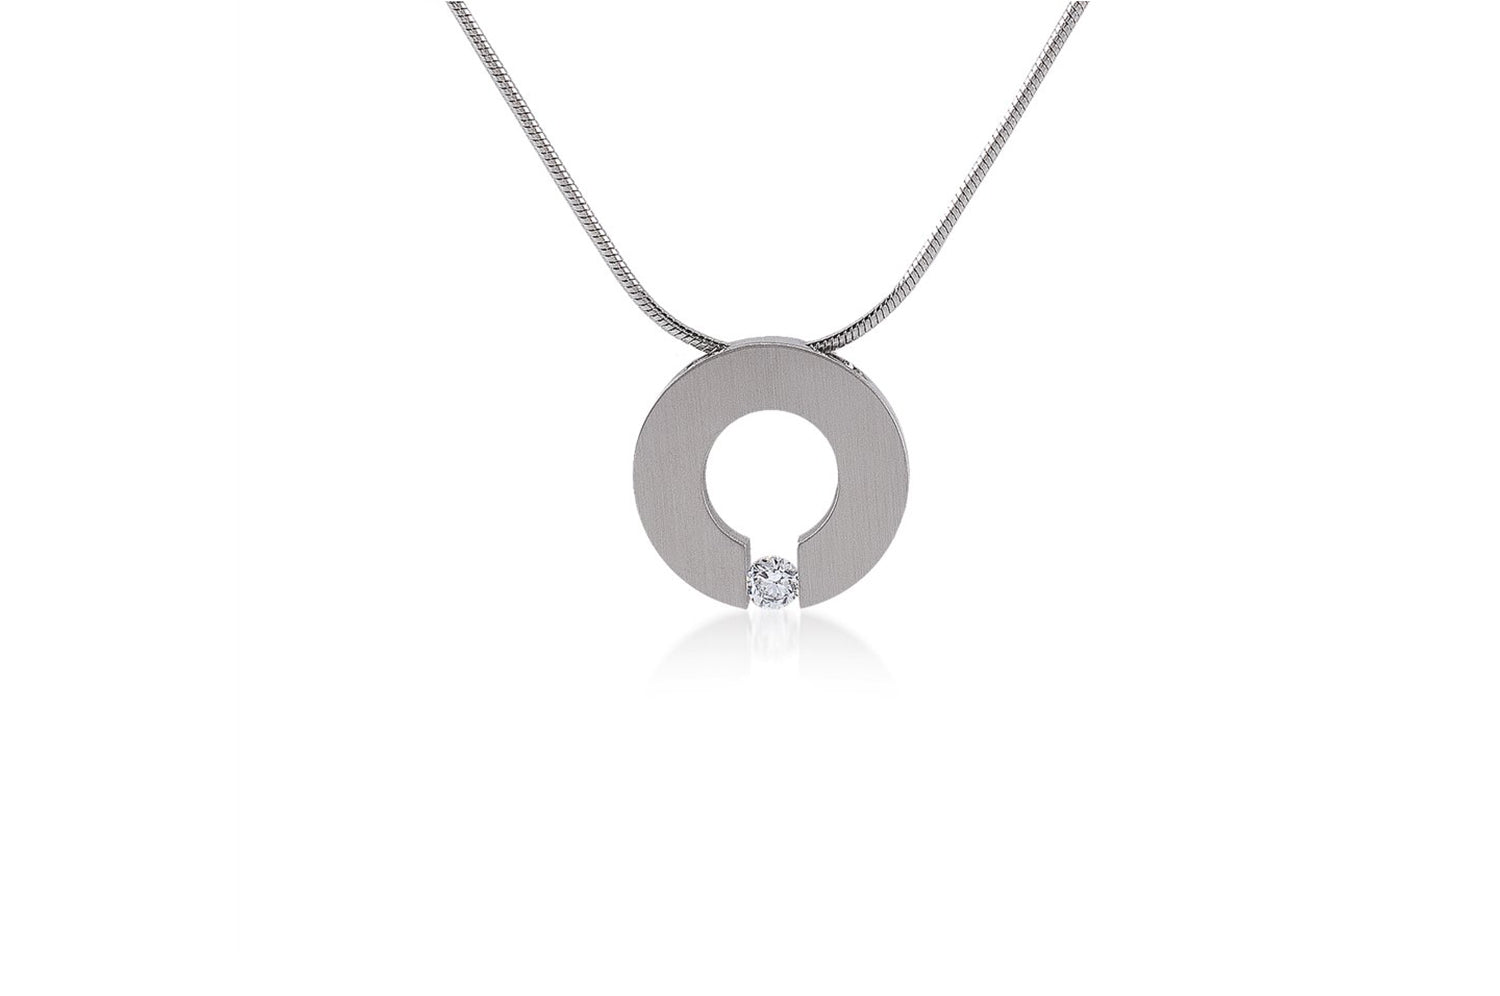 Malfinia Coil Stainless Steel Necklace